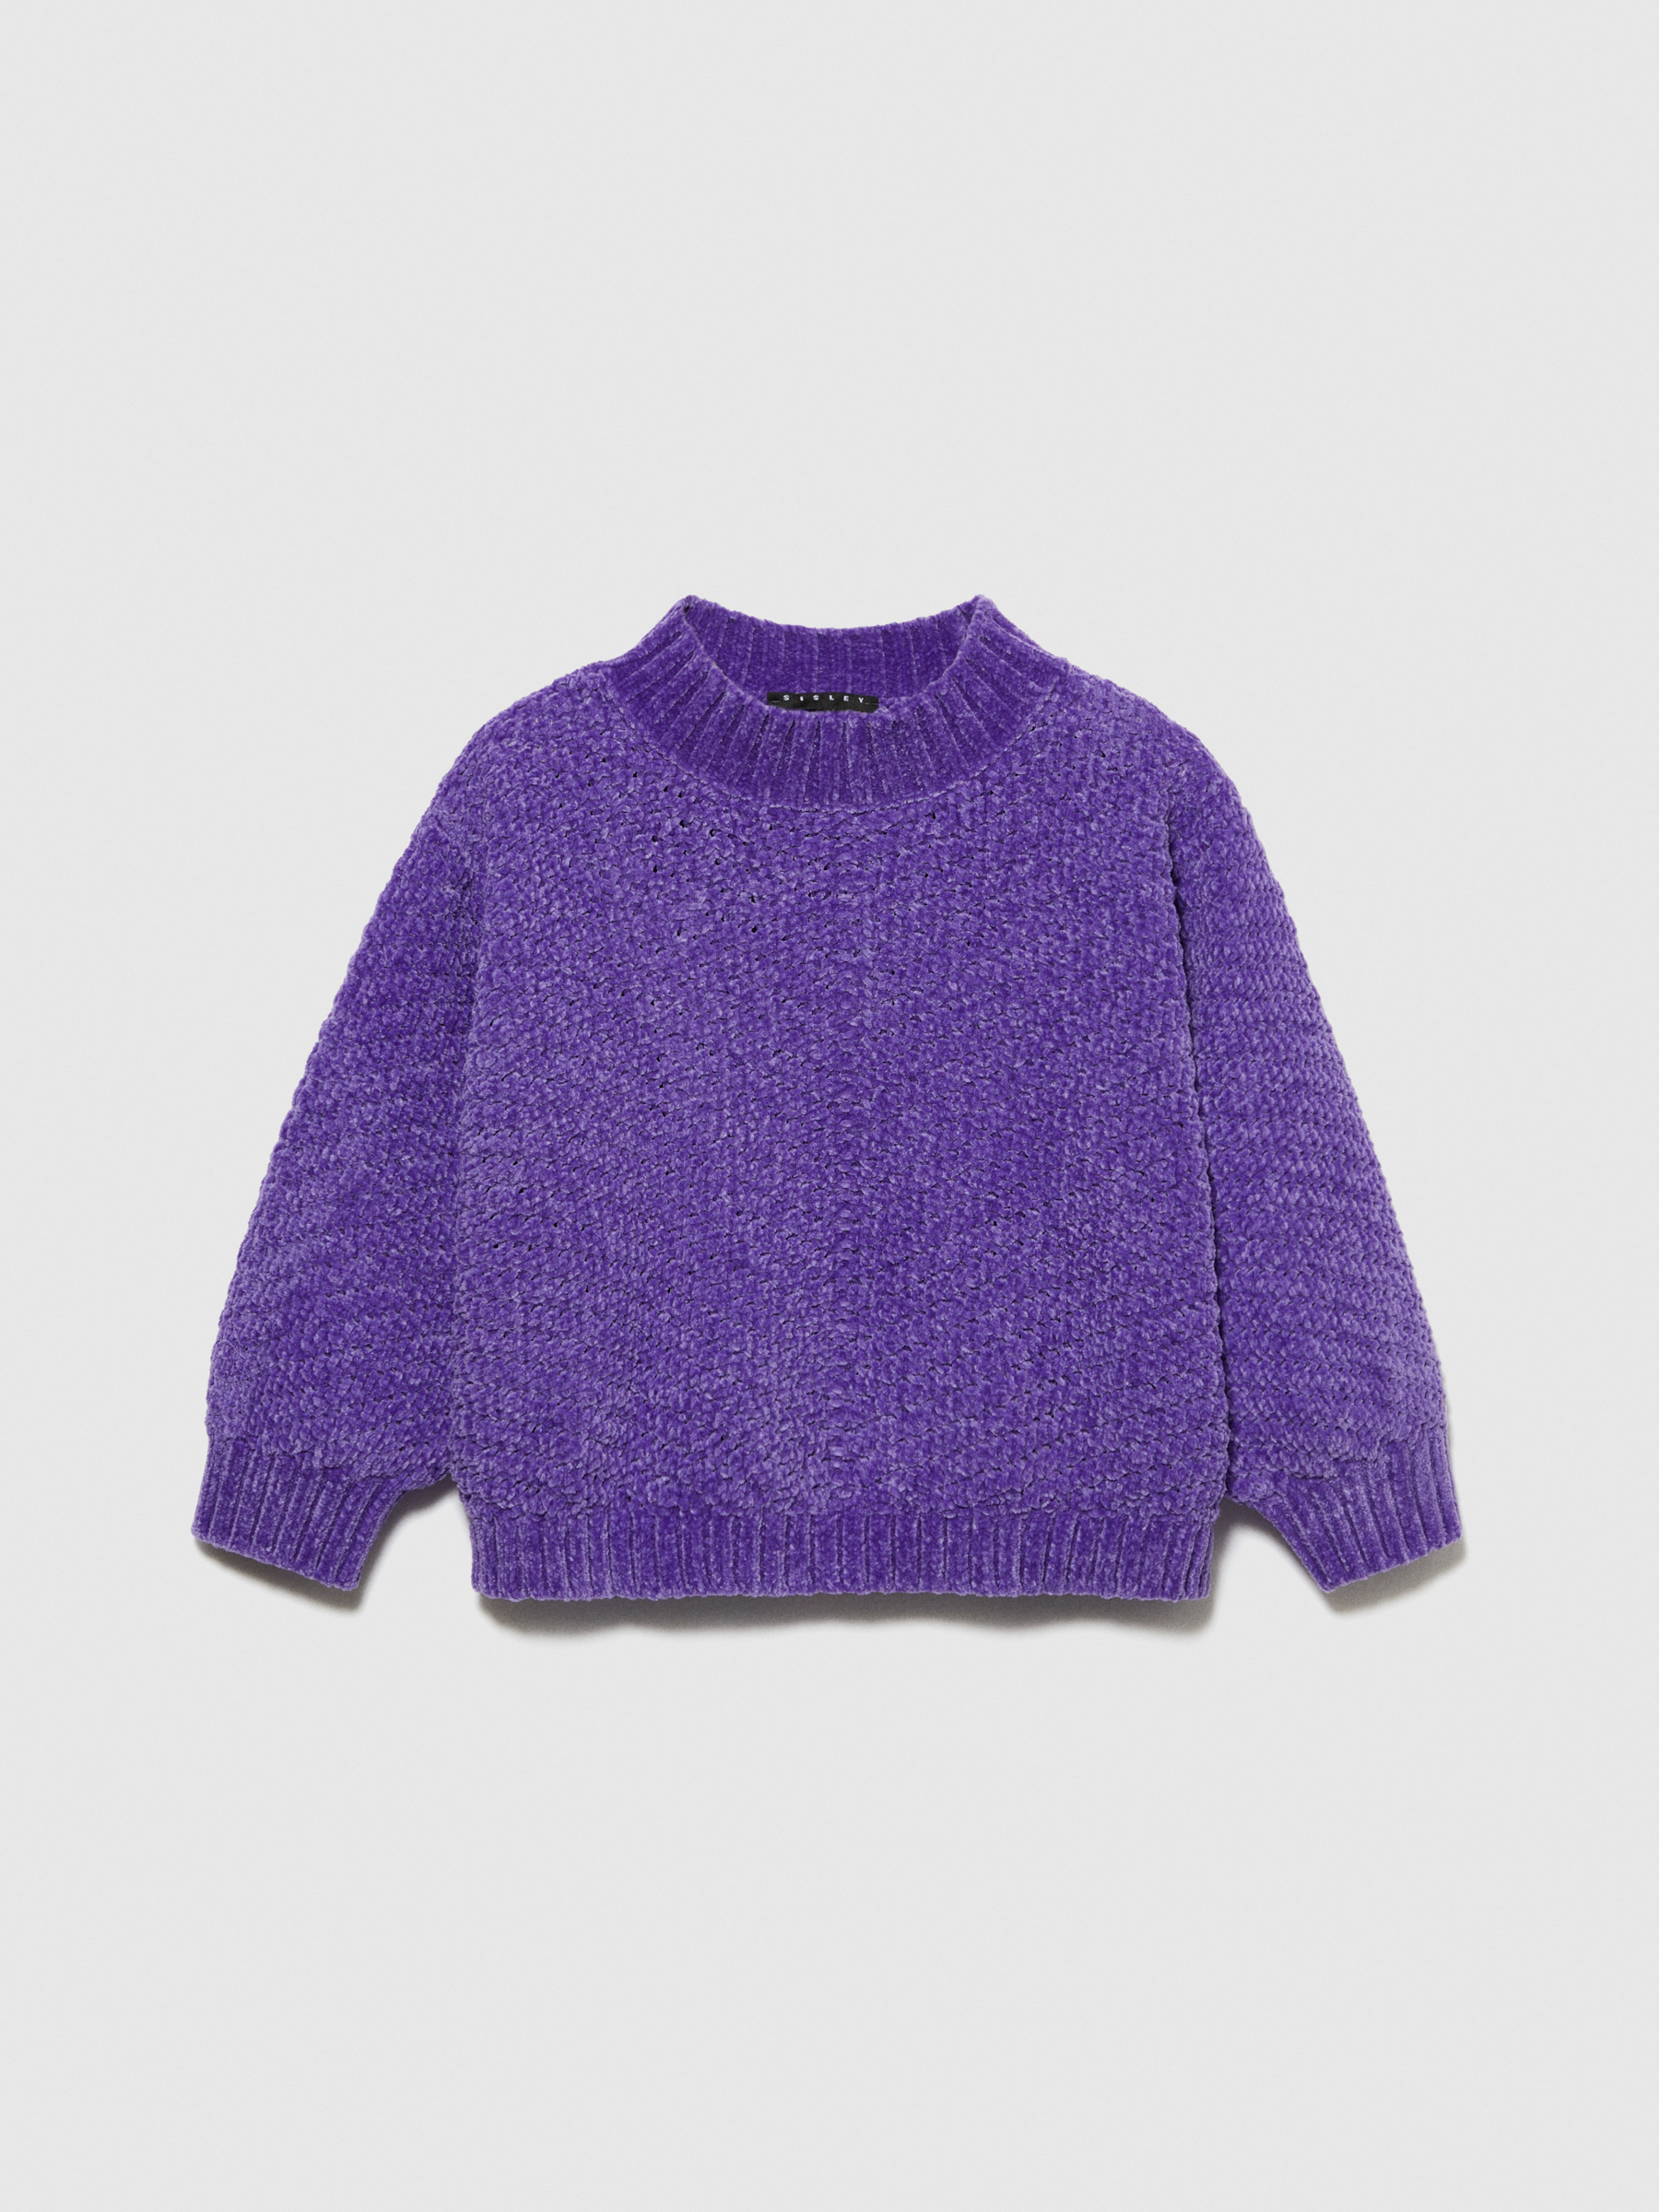 Sisley Young - Cropped Chenille Sweater, Woman, Violet, Size: L